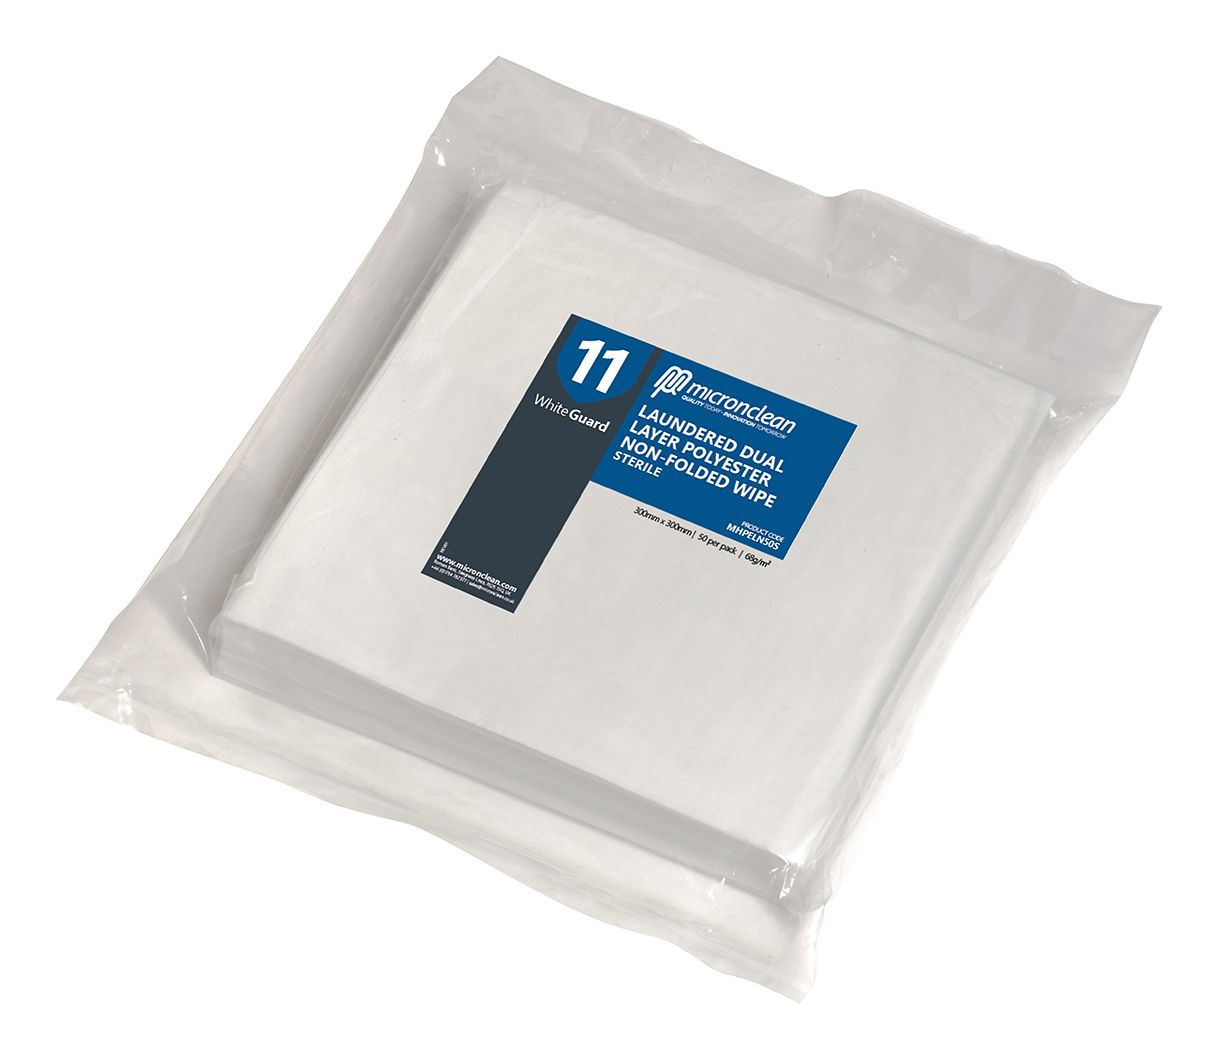 WhiteGuard 11 - Laundered Dual Layer Polyester Wipes - Sterile [ROW]